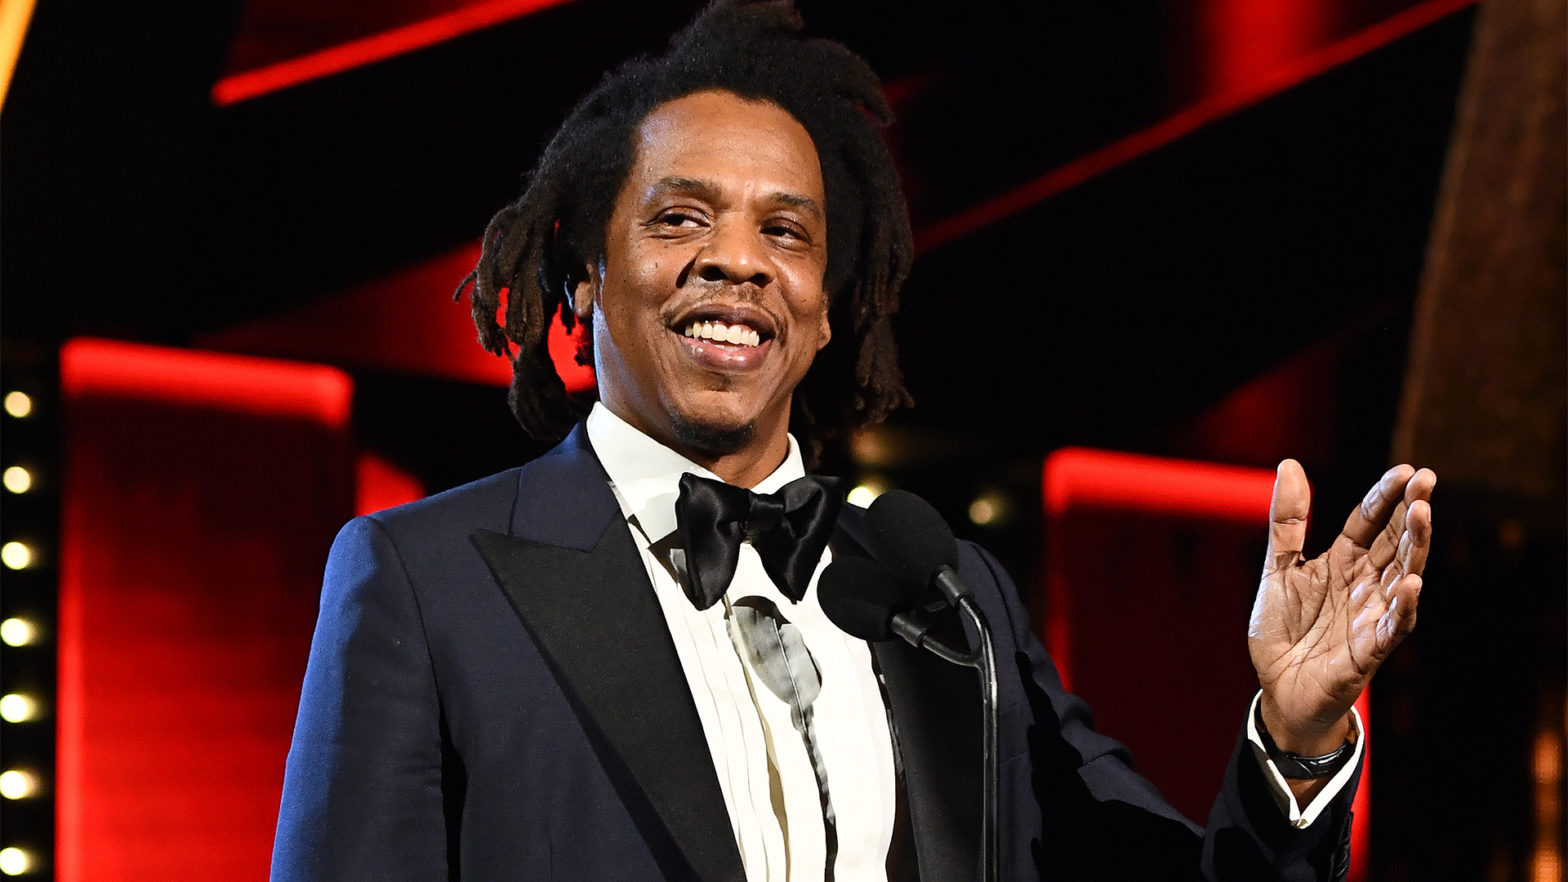 5 Pieces Of Financial Advice Jay-Z Dropped On '4:44' That You May Have Missed